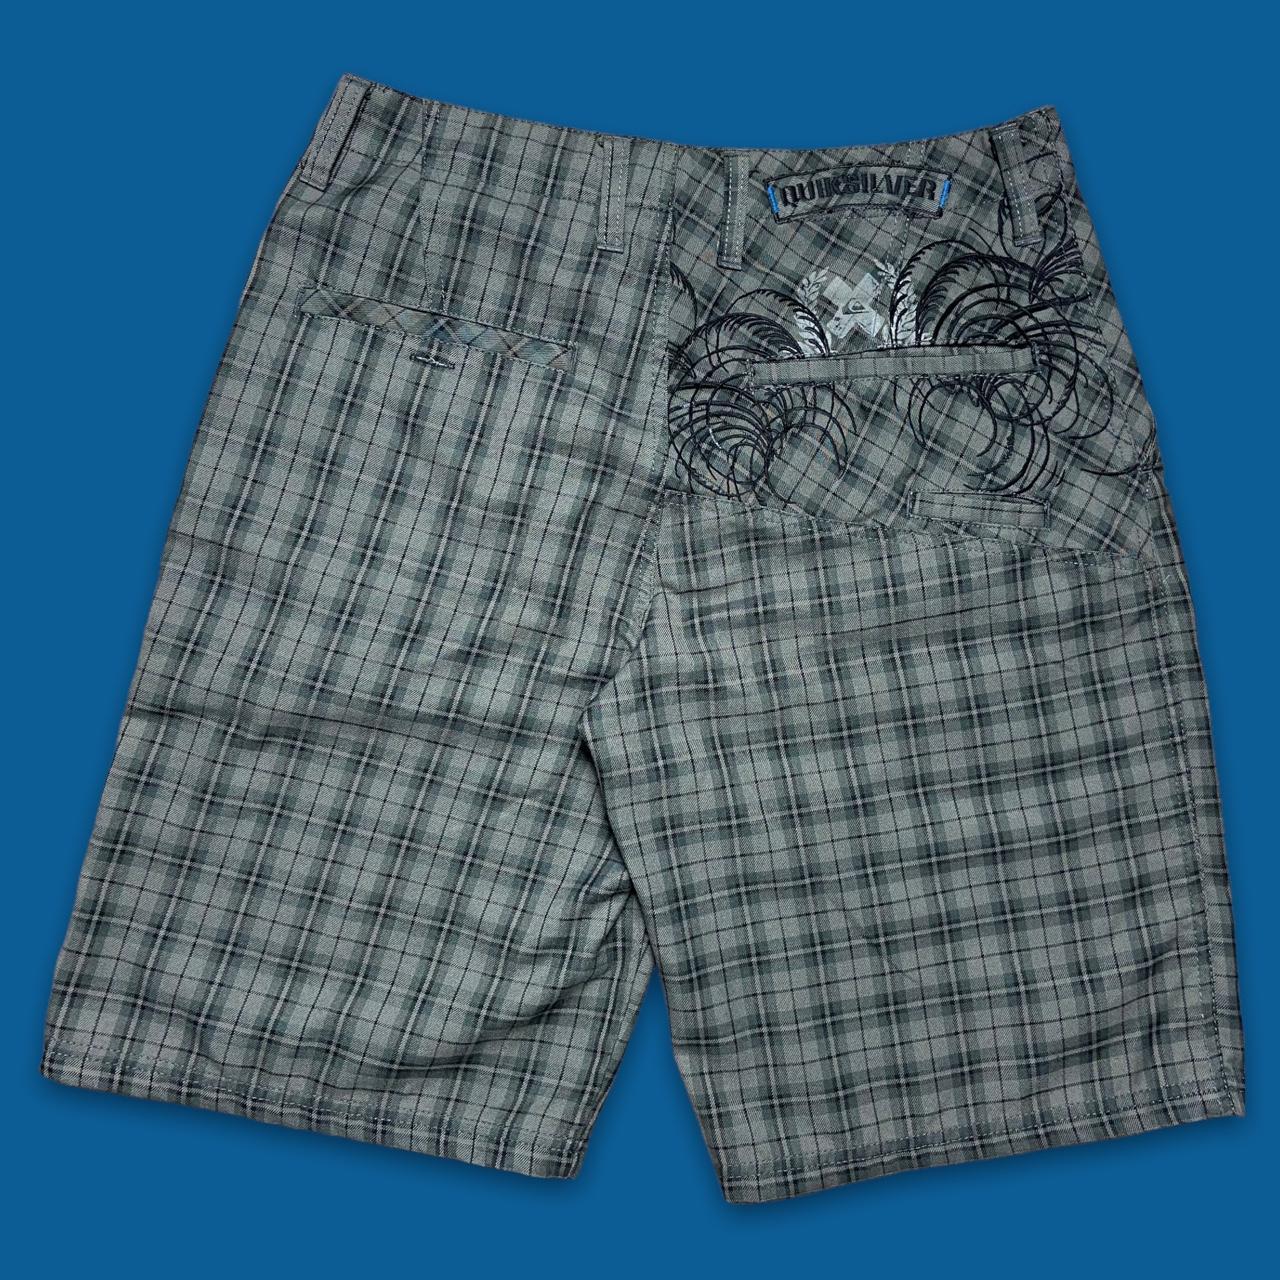 Quiksilver Men's Black and Green Shorts (2)